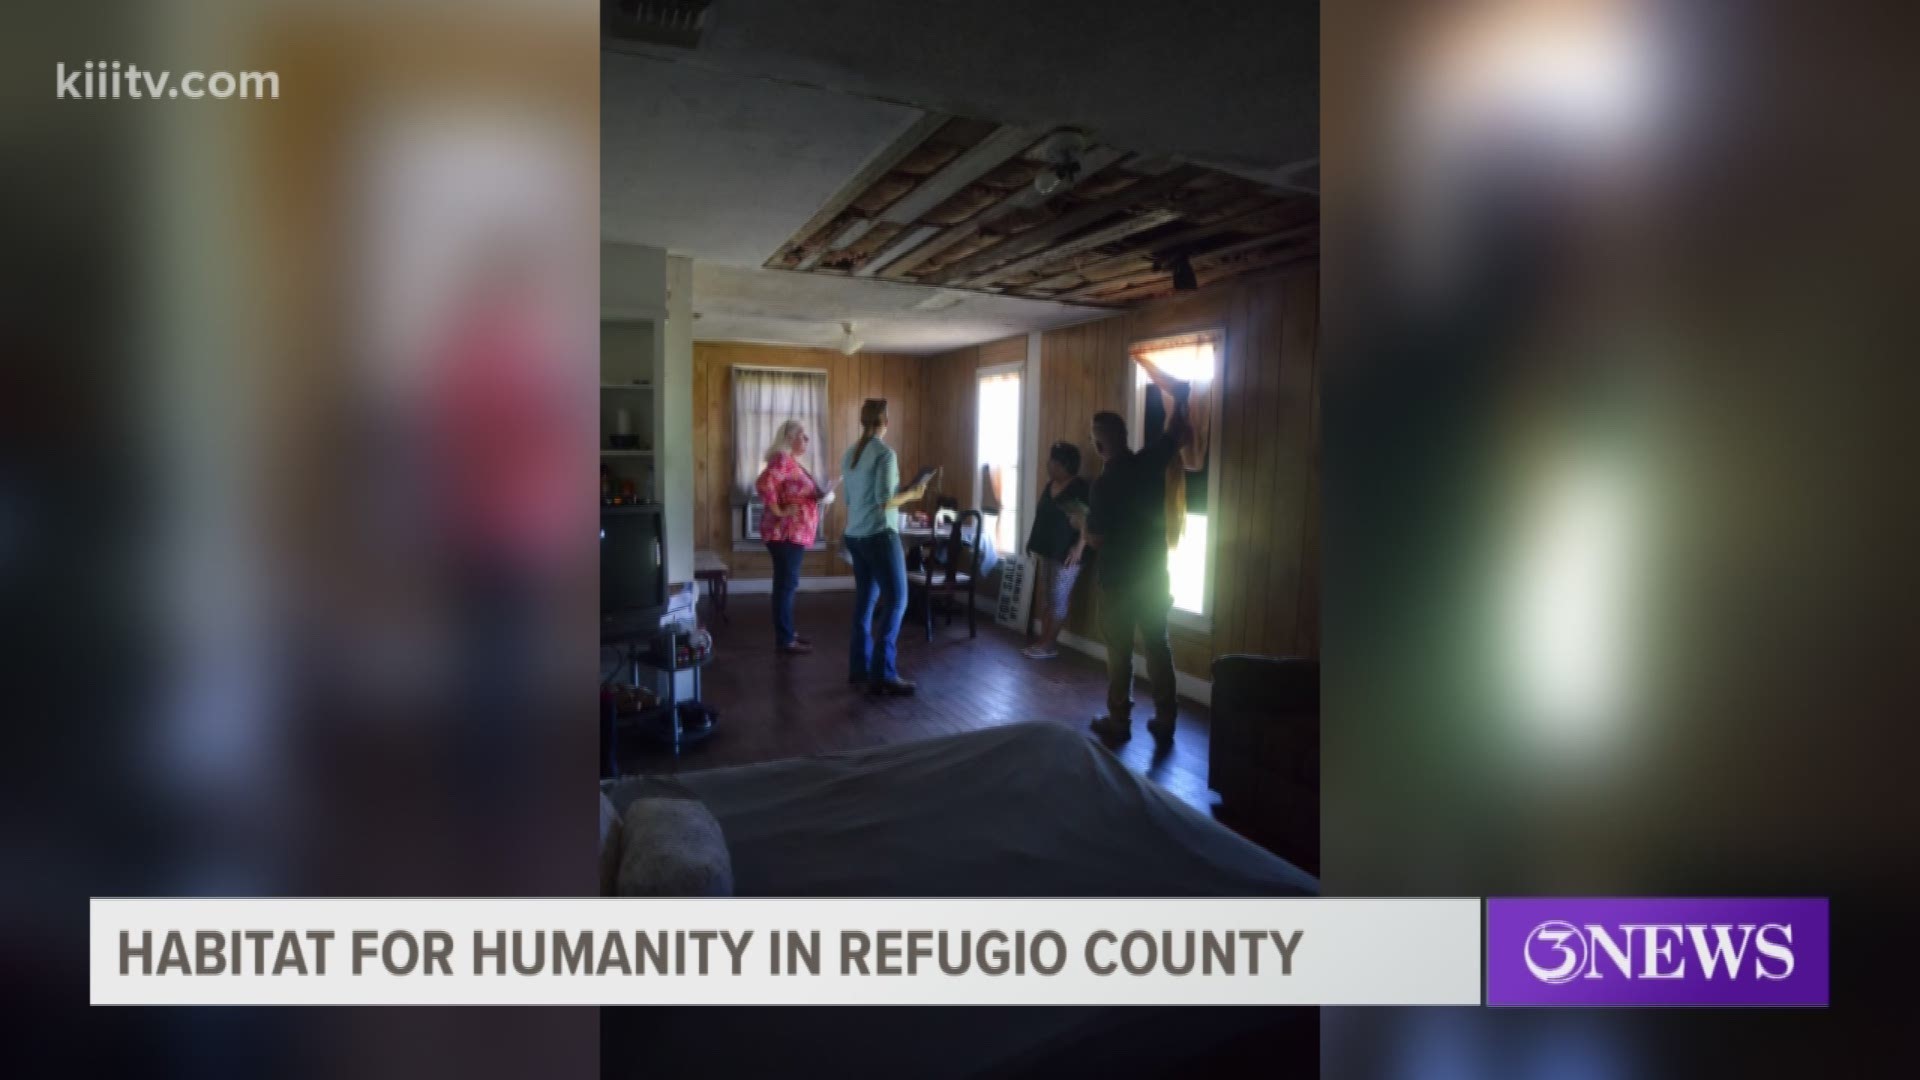 Habitat for Humanity in Refugio County announced a major grant that will help the group rebuild 10 more homes in that community, which is still trying to recover fro